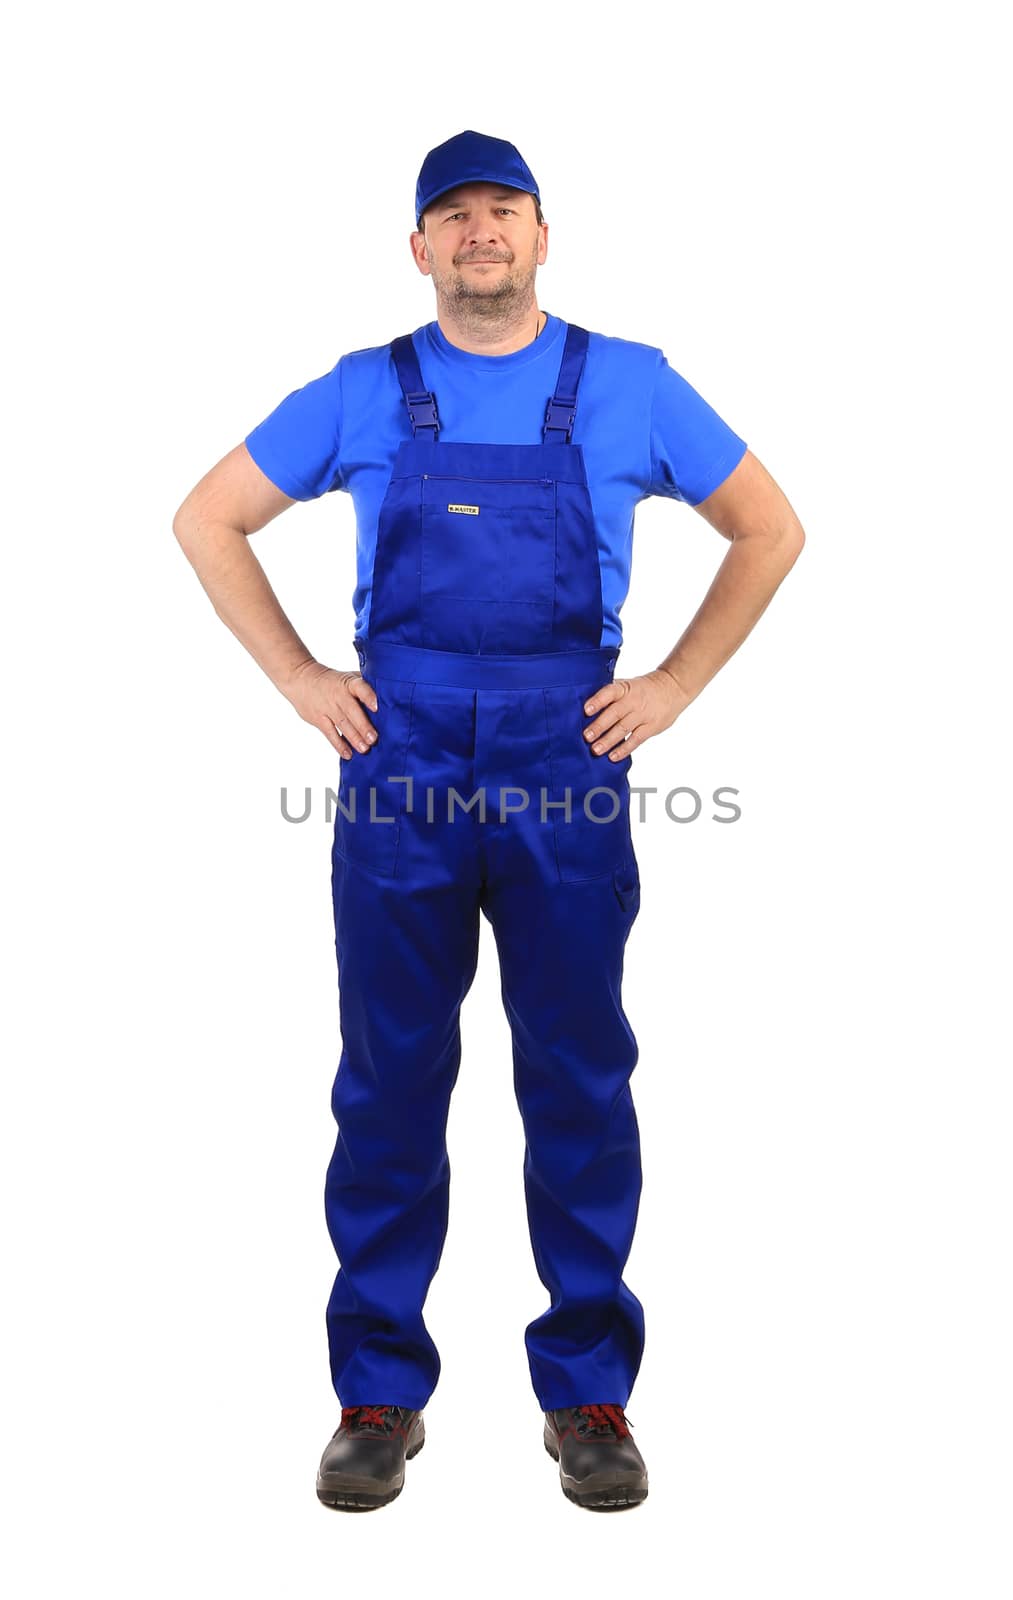 Worker in blue overalls. Isolated on a white background.